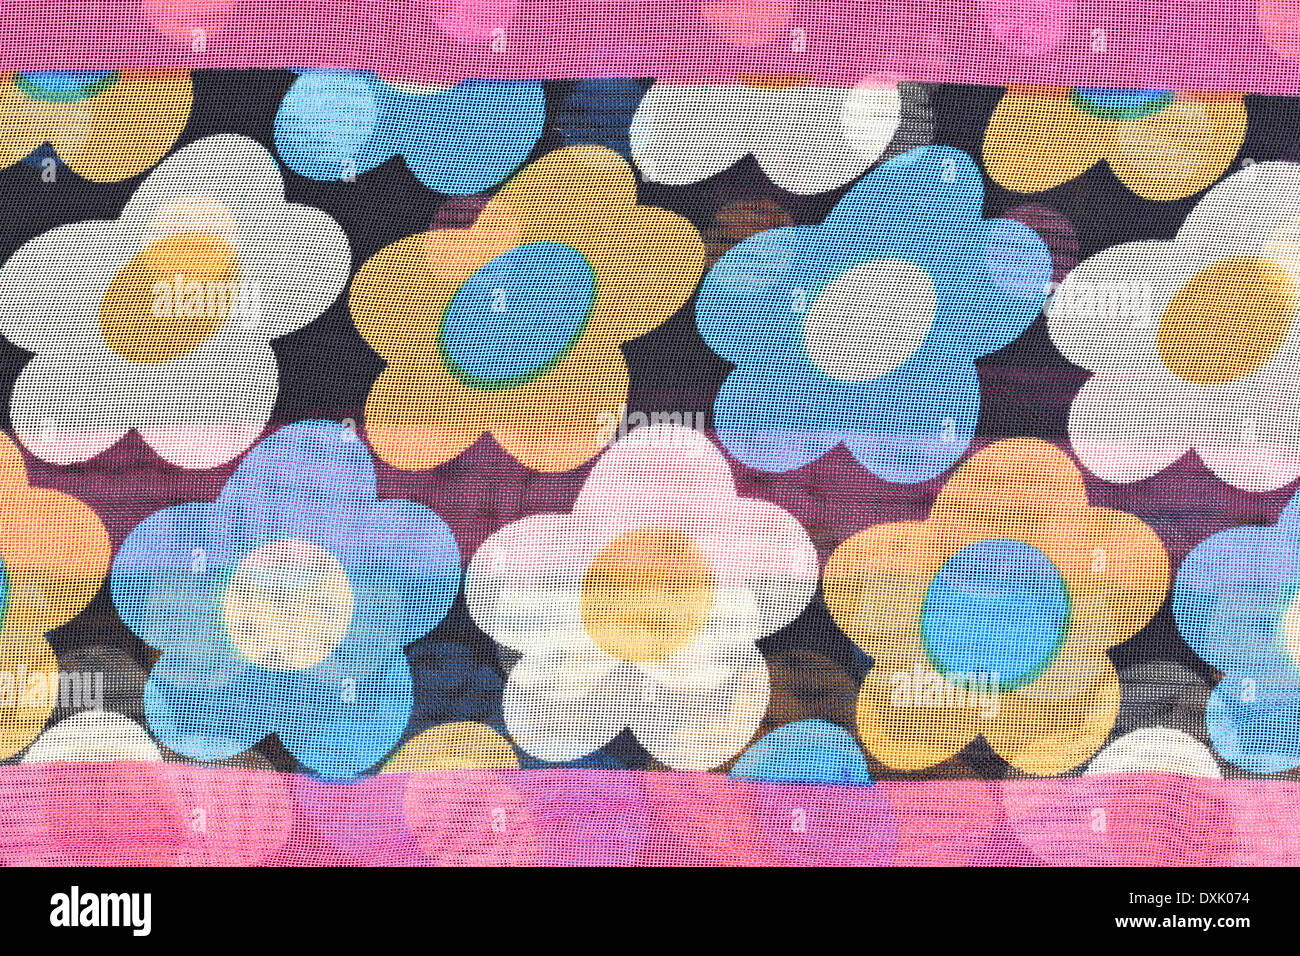 Flower pattern on fabric of scarf for the background. Stock Photo